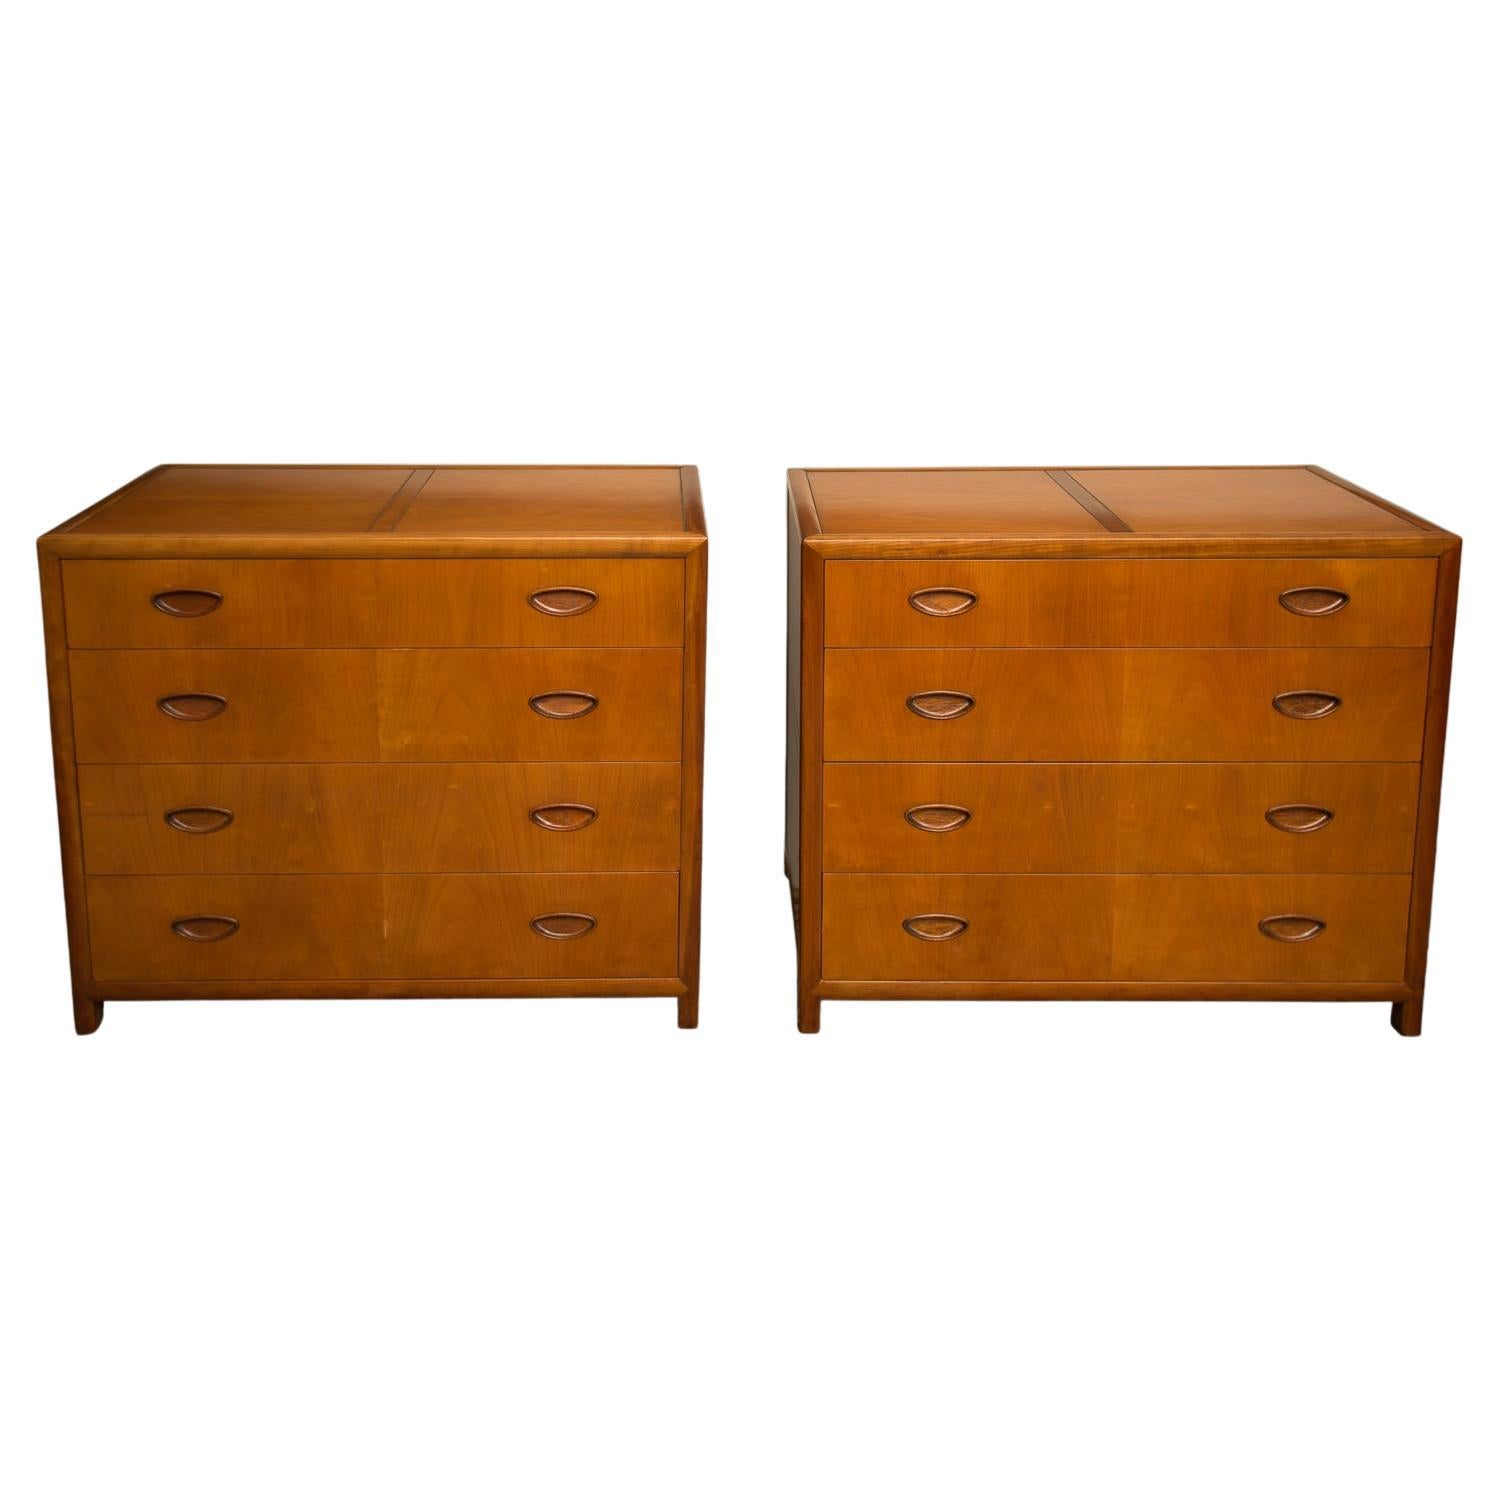 Pair of Michael Taylor Four Drawer Chests in Elm Wood